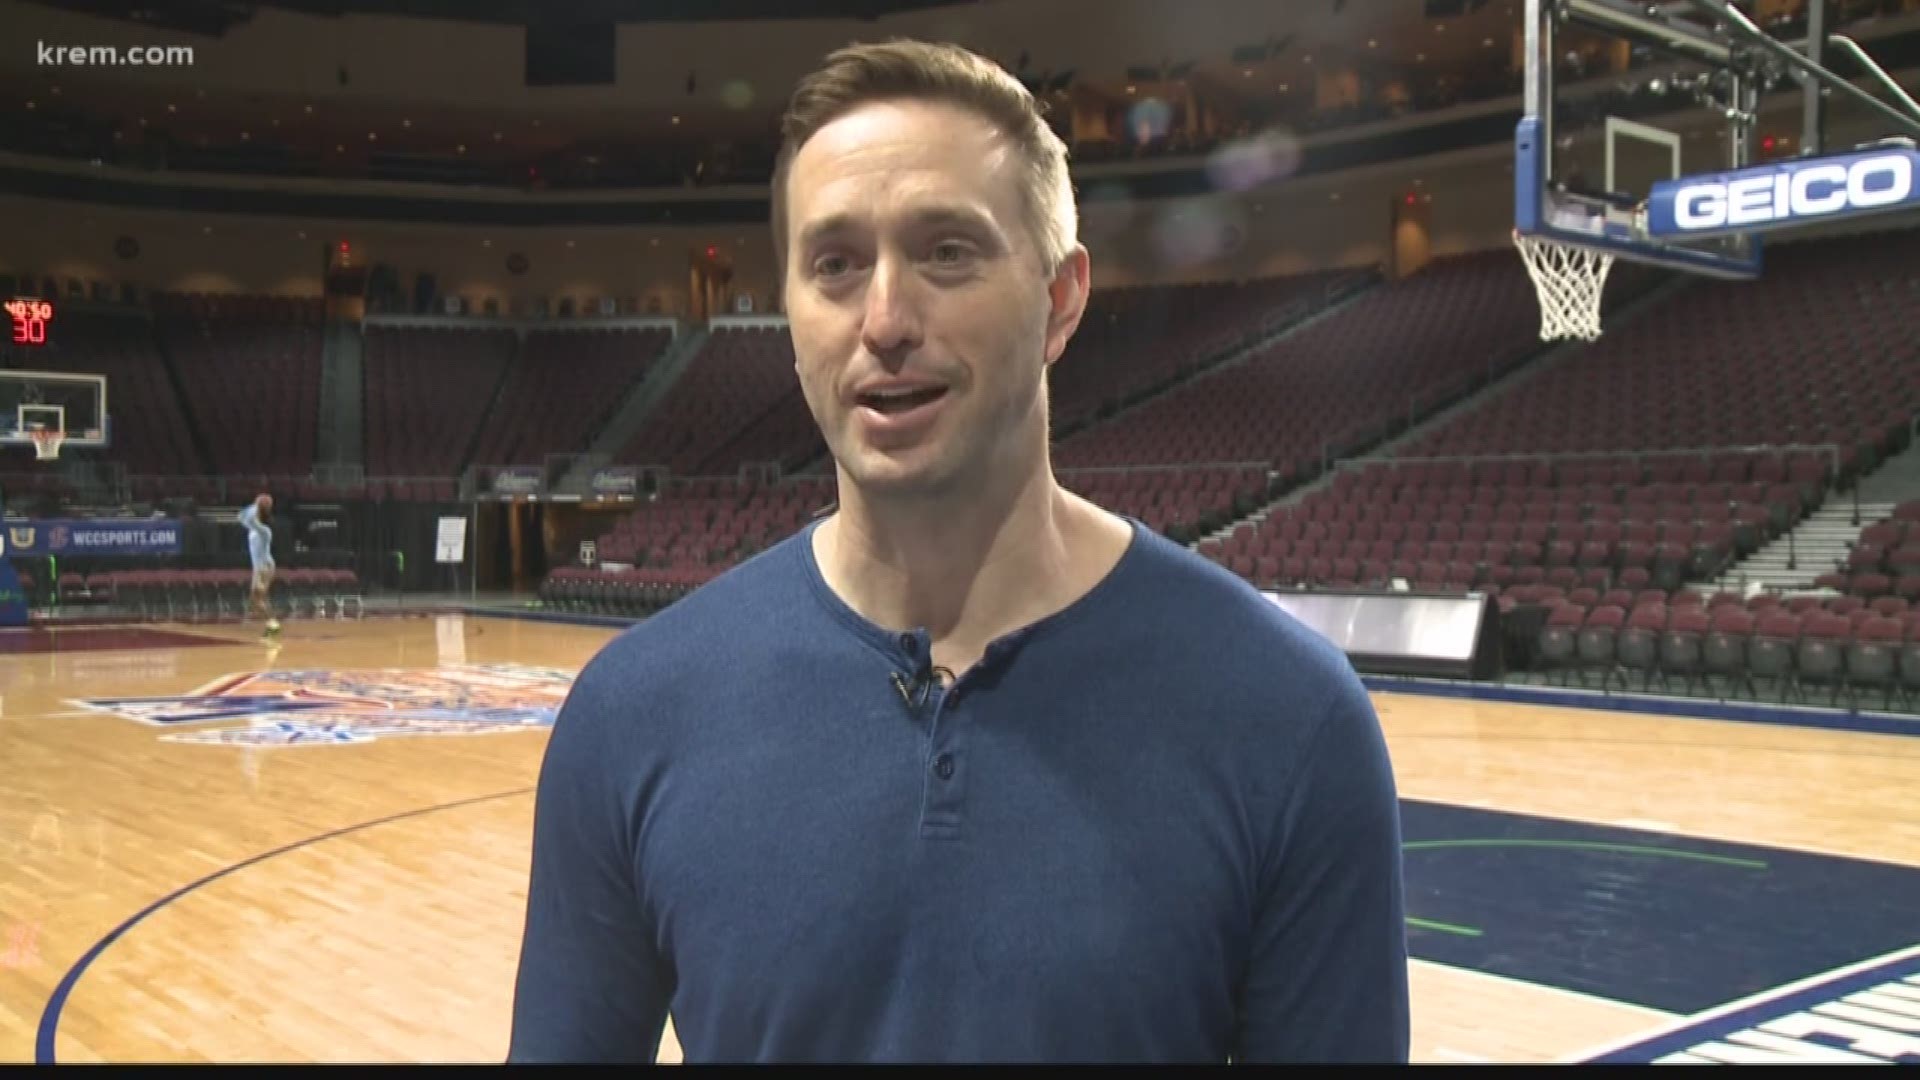 KREM Sports Director Brenna Greene caught up with ESPN's Sean Farnham about his special roots with Gonzaga and why he thinks the Bulldogs will win it all.